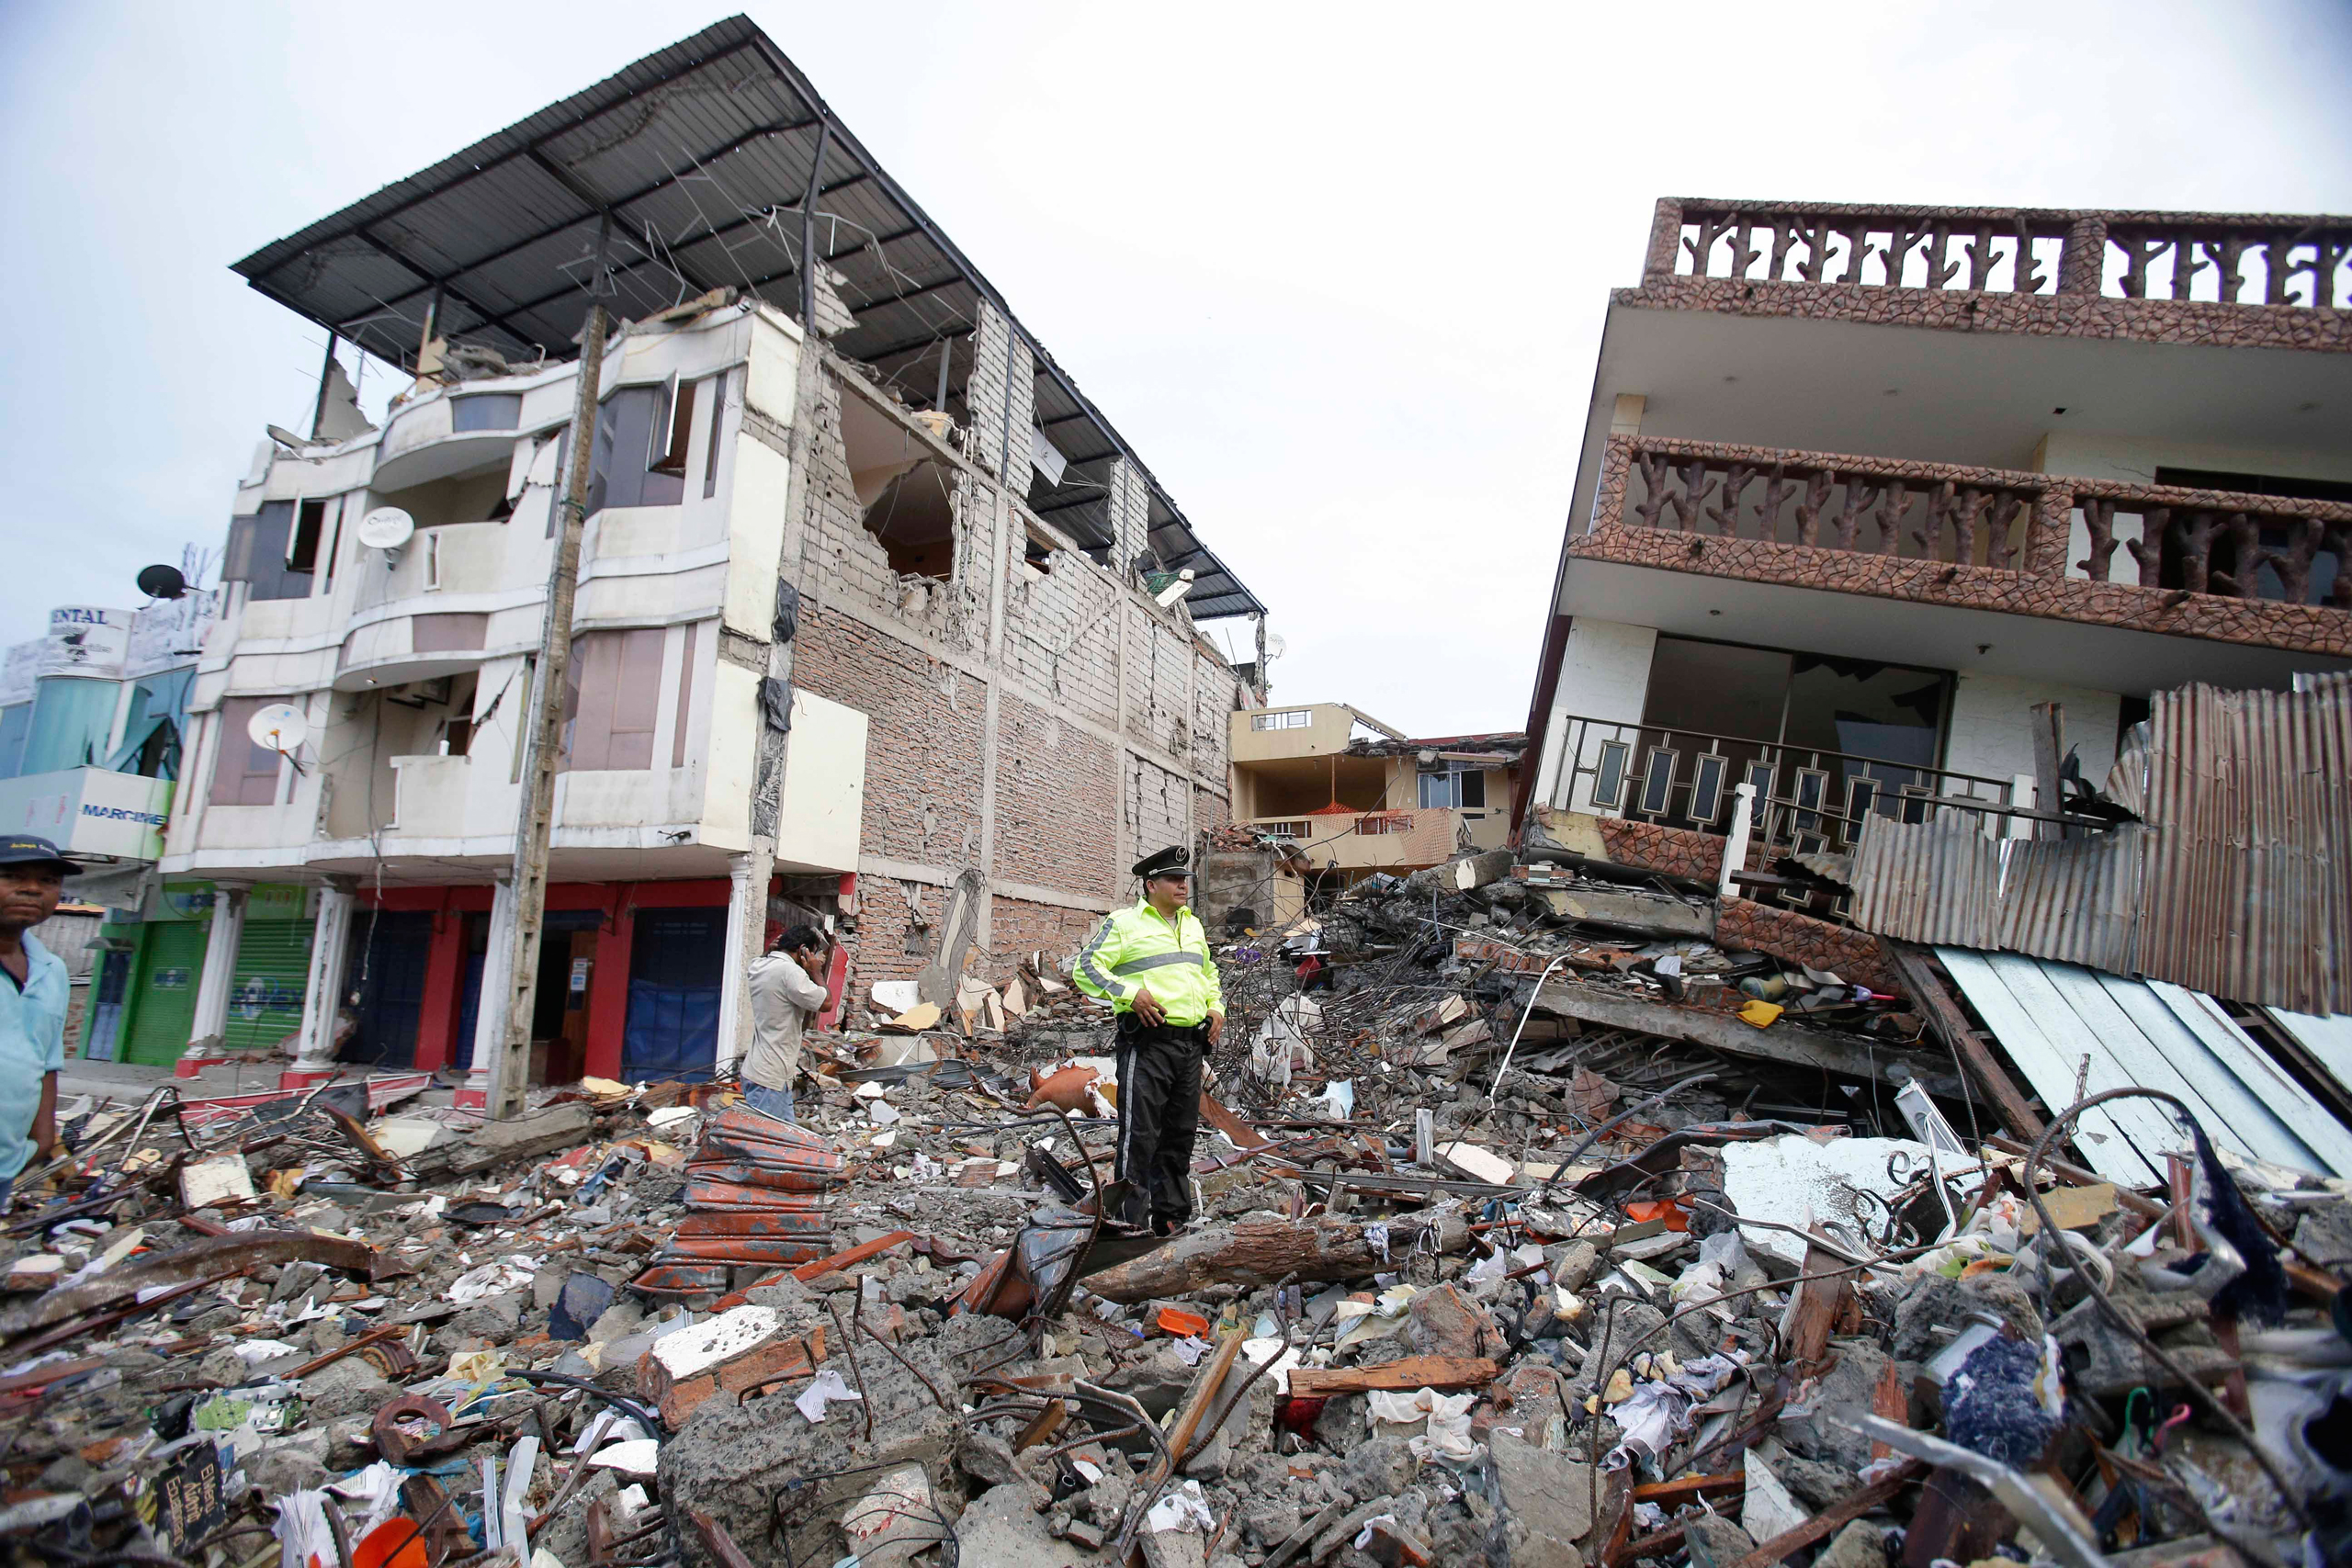 A police officer stands on debris, next to buildings destroyed by an earthquake in Pedernales, Ecuador, on April 17, 2016.